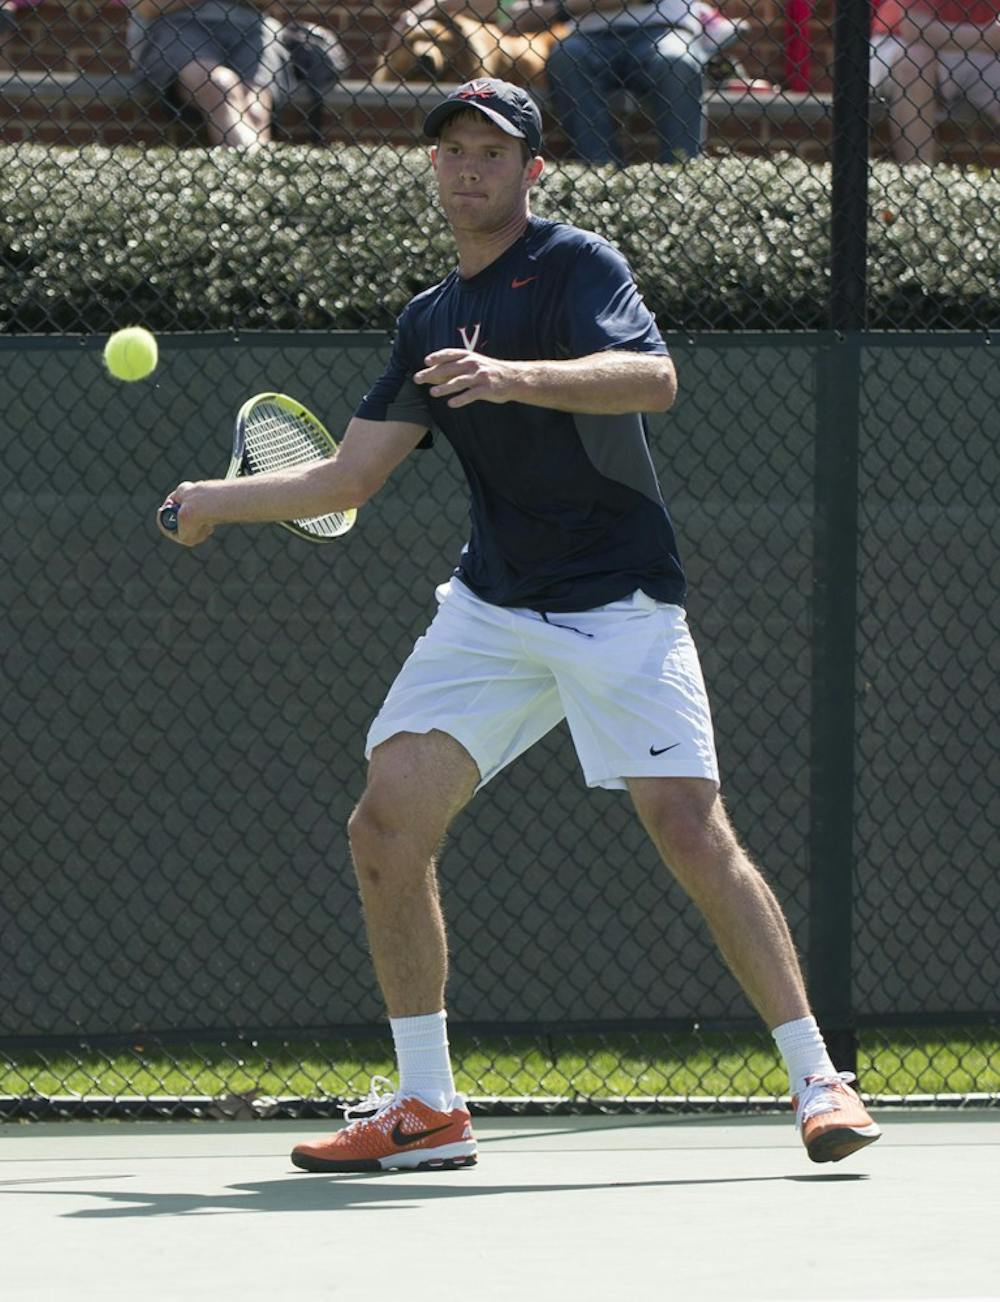 <p>Virginia captain senior Mitchell Frank is one of eight Cavaliers set to compete in the Dallas Challenger. The pro-level event is part of the ATP Challenger Tour, and Virginia's participants will likely be made to play through qualifiers for a spot in the main draw. </p>